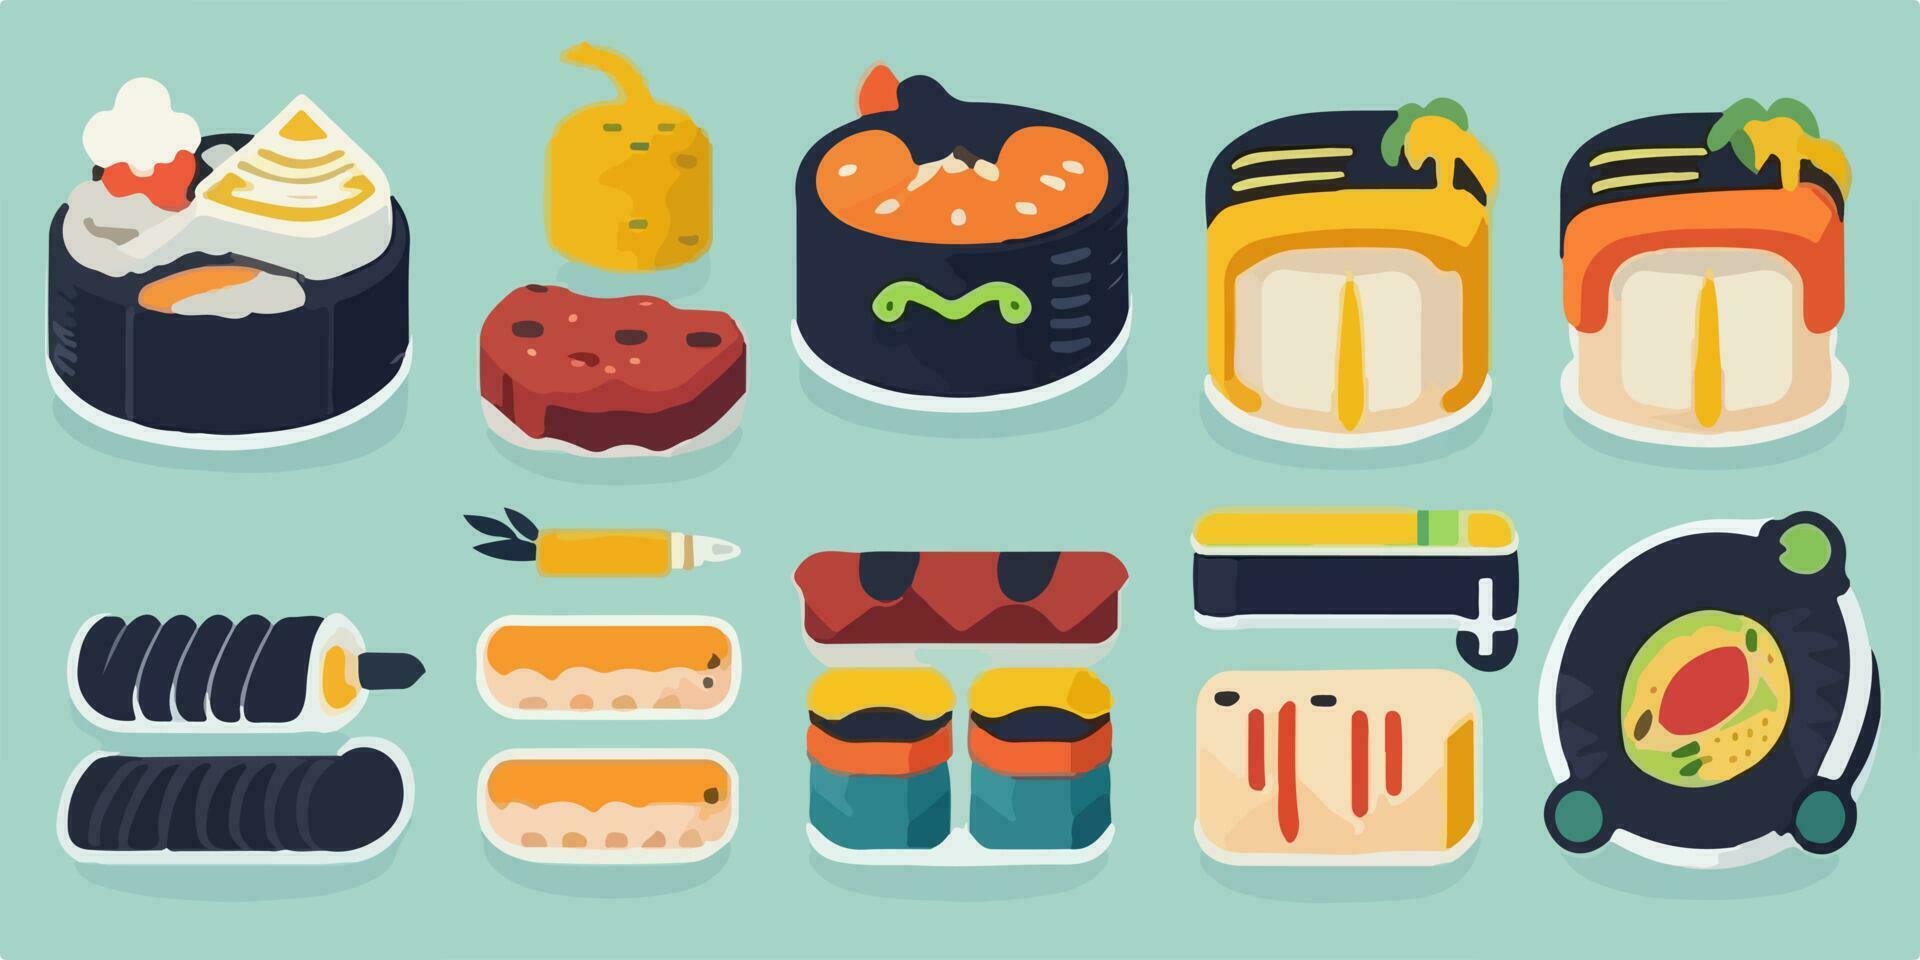 Sushi Chef's Delight, Colorful Vector Illustration Showcasing Tempting Rolls